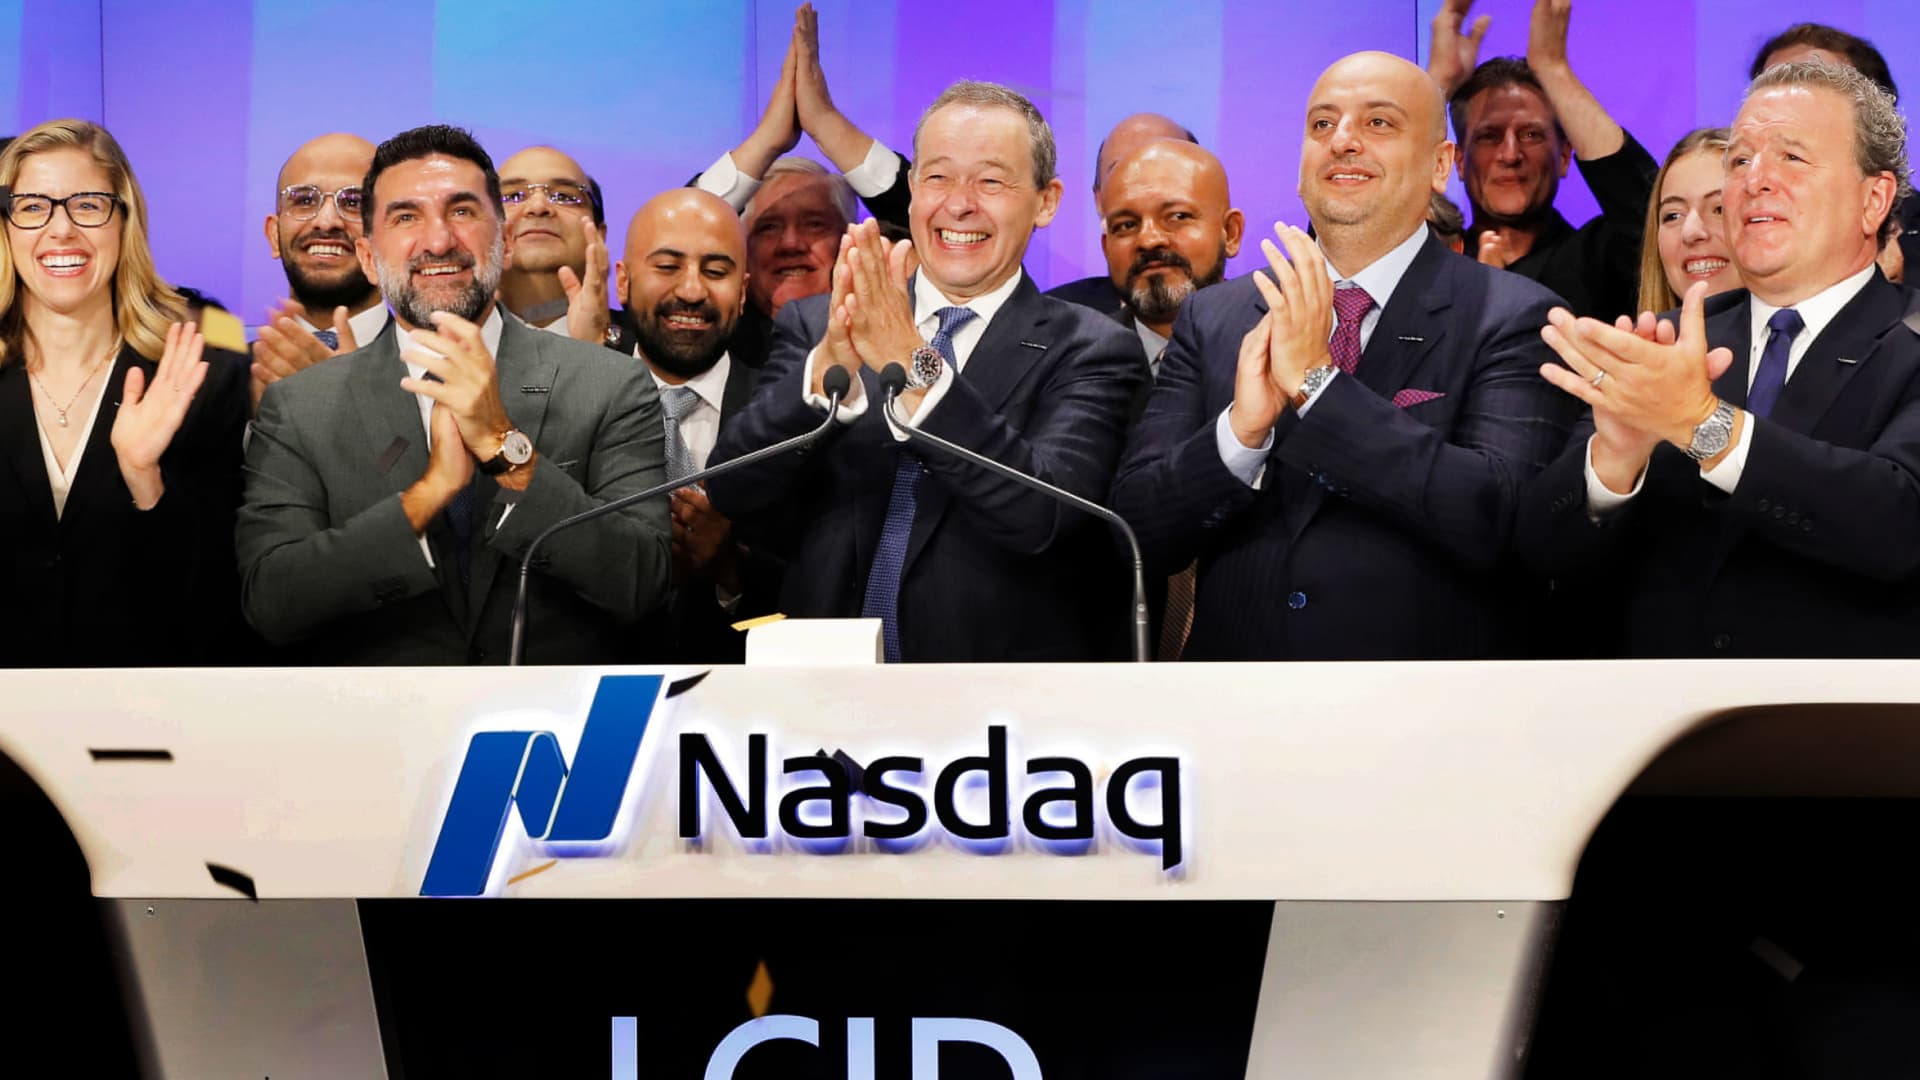 ev-maker-lucid-closes-$1.5-billion-raise-from-the-saudi-public-wealth-fund-and-other-investors